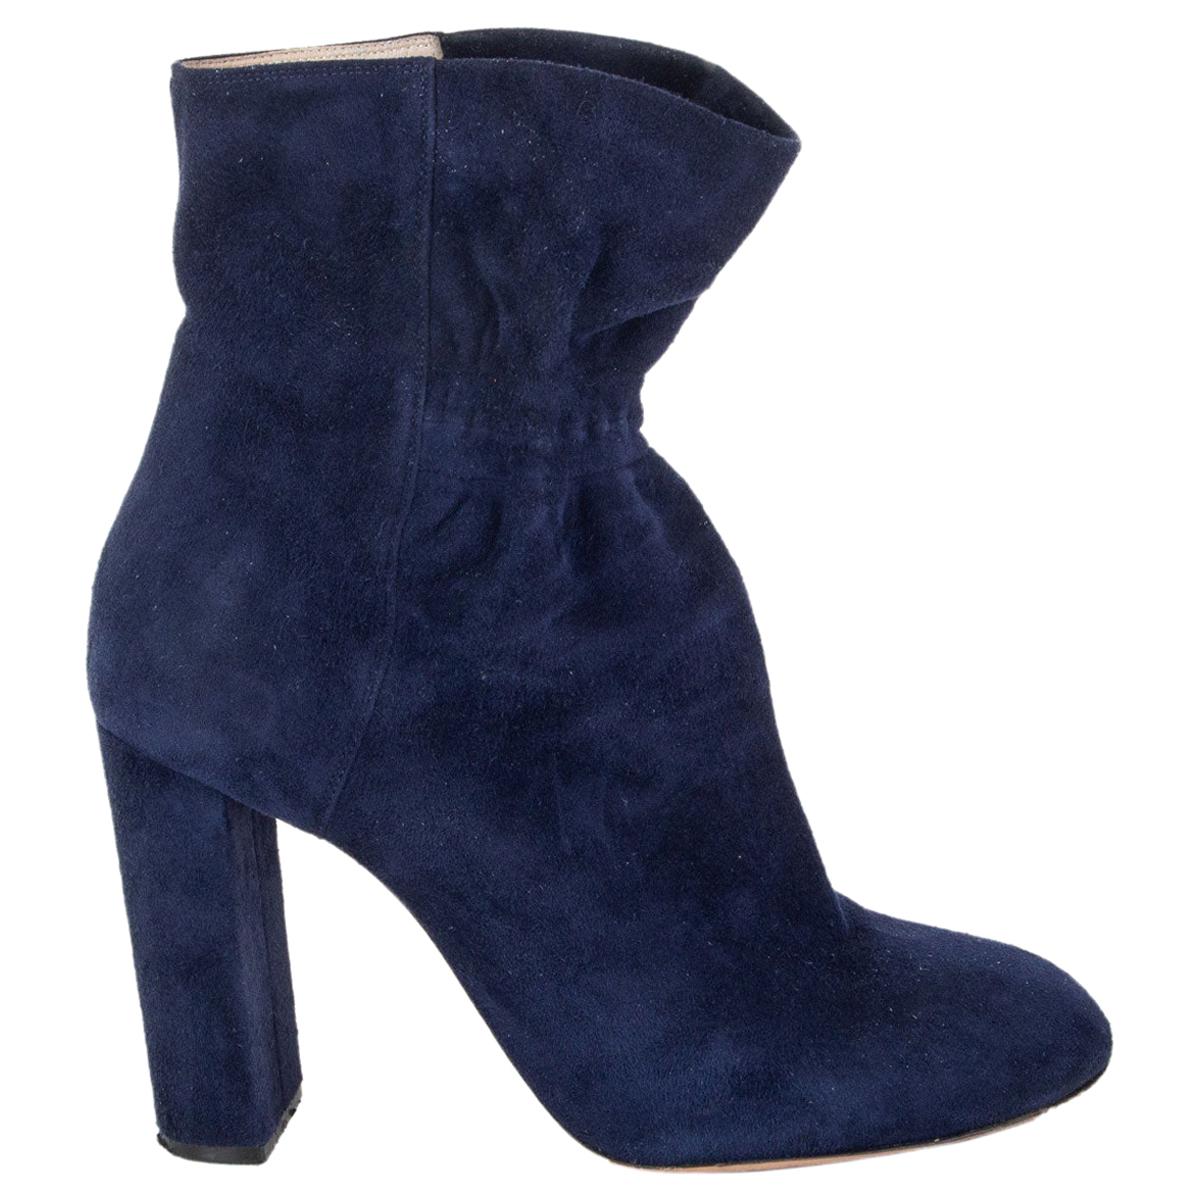 CHLOE navy blue suede Ankle Boots Shoes 38 For Sale